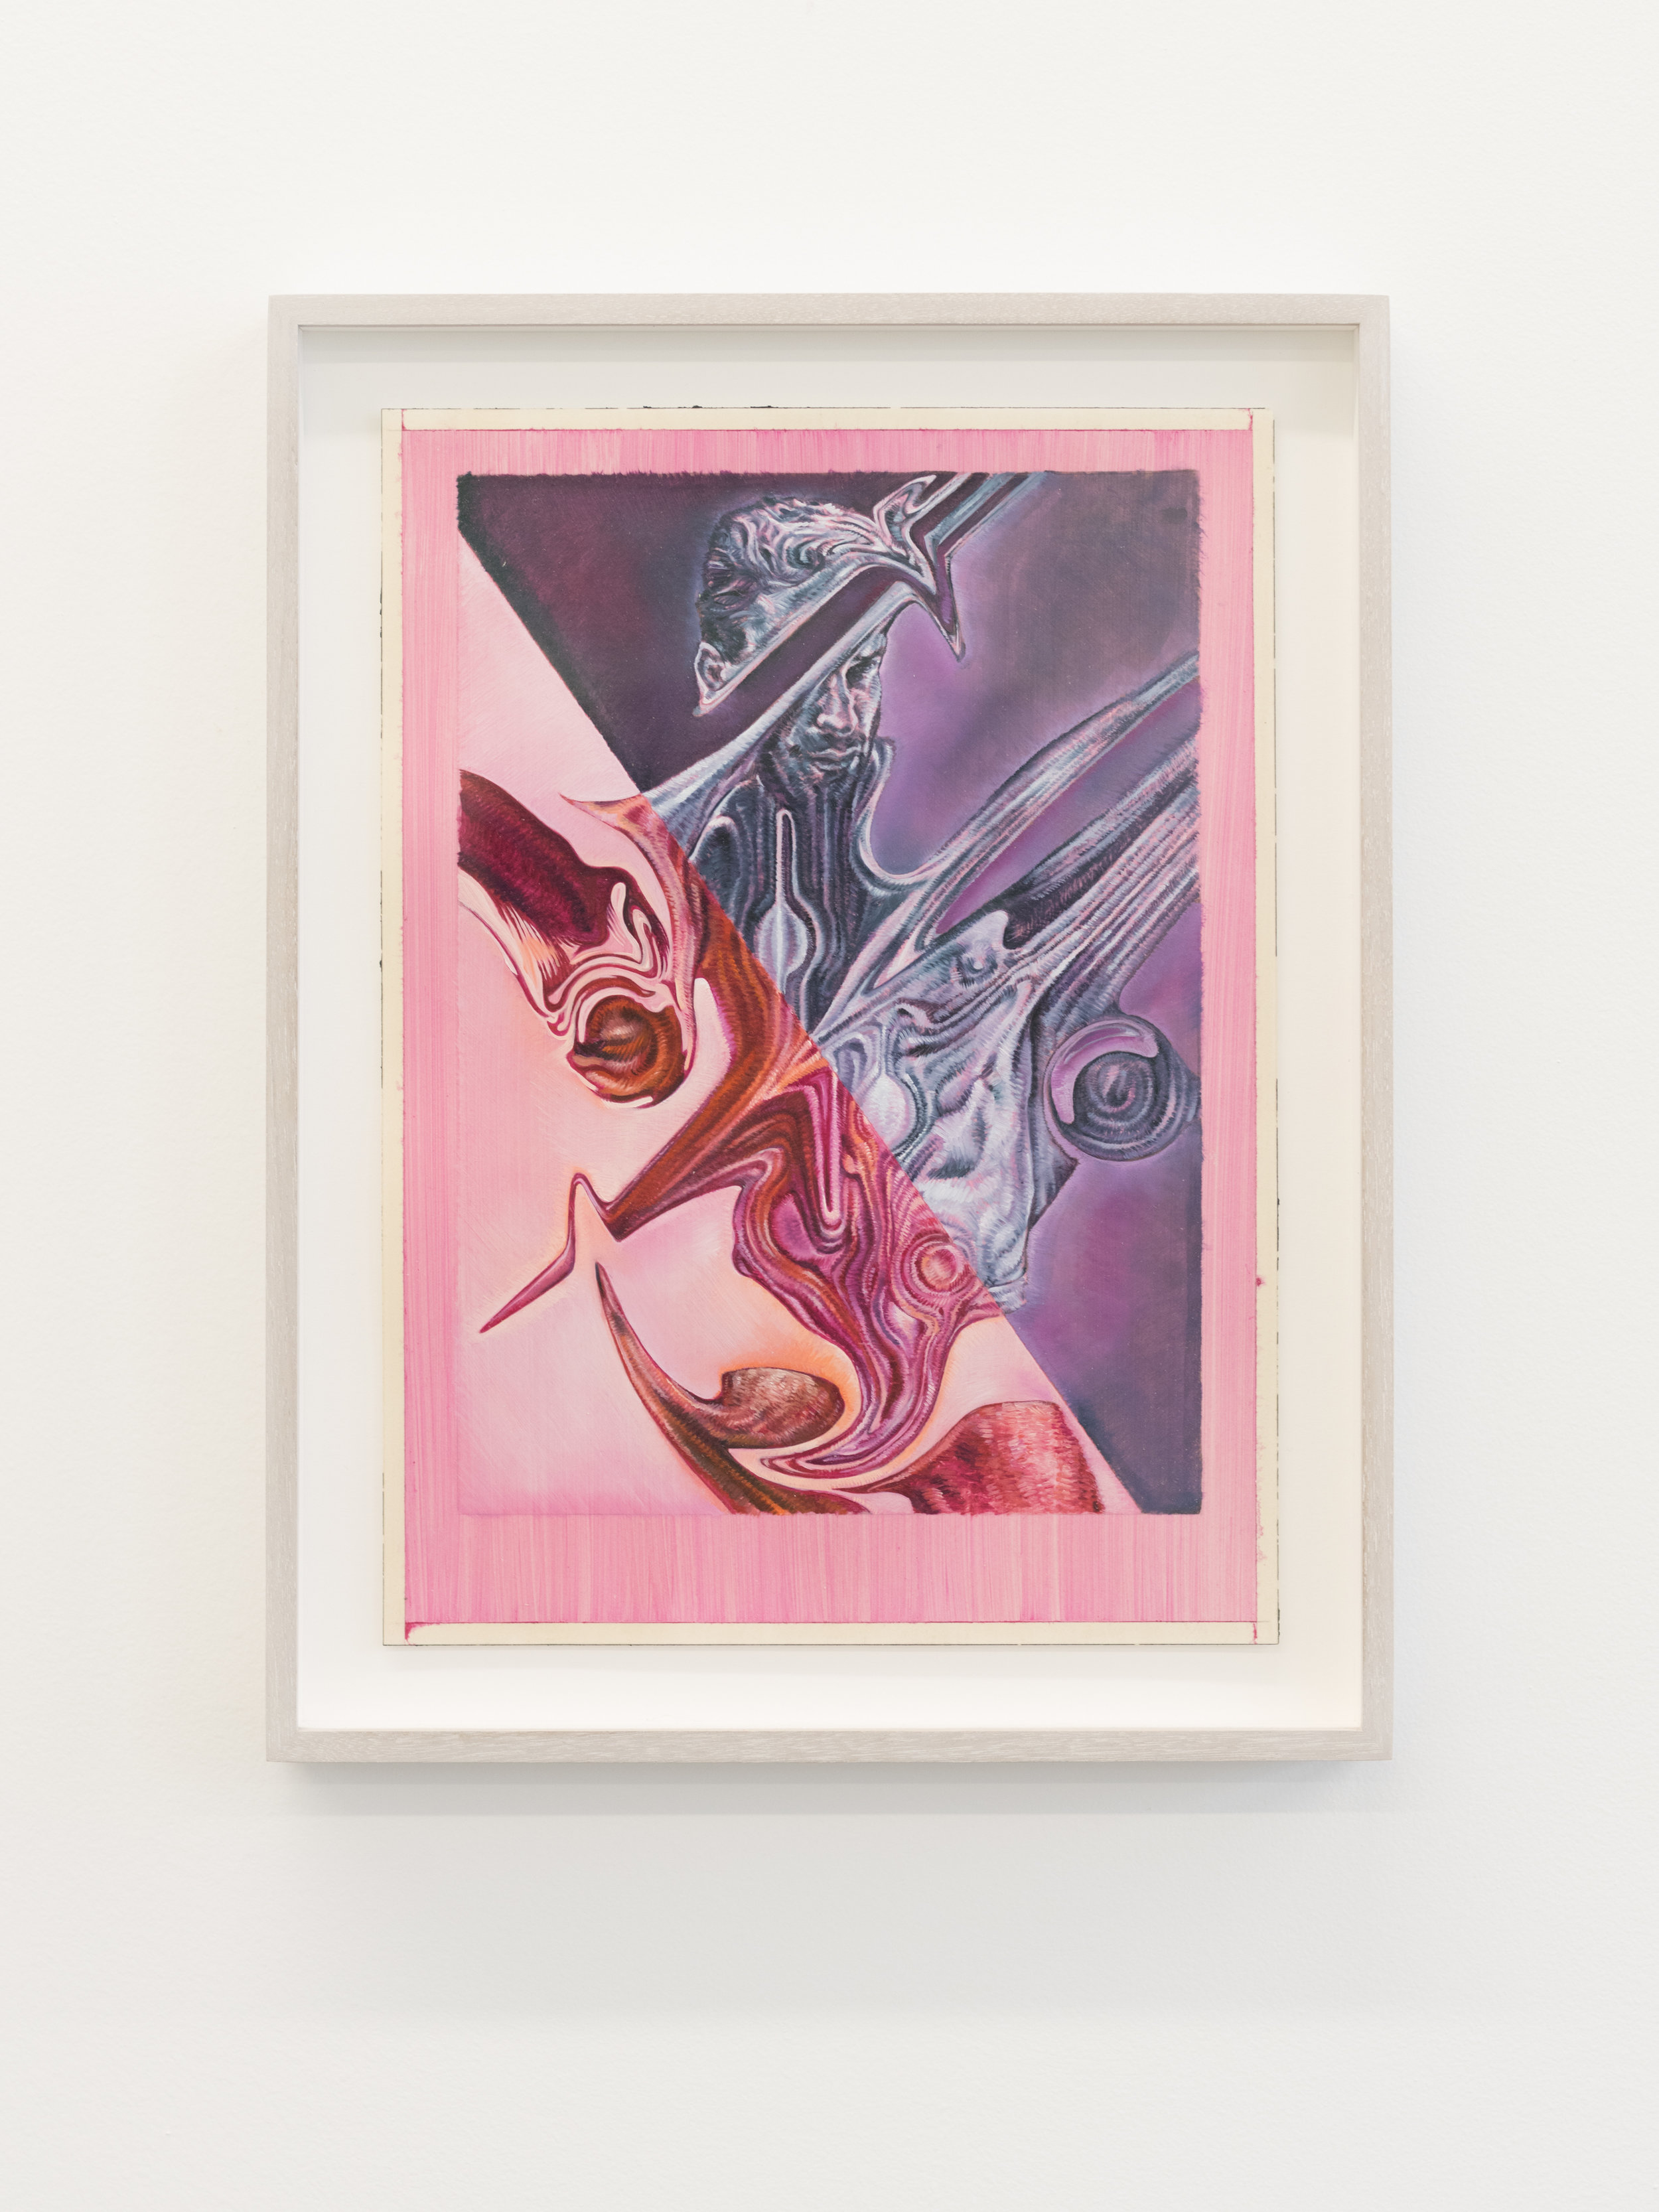  David Lasley   Mr. Pink and Purple , 2018  Oil on paper  10 x 14 in, 12.5 x 16.5 in framed 